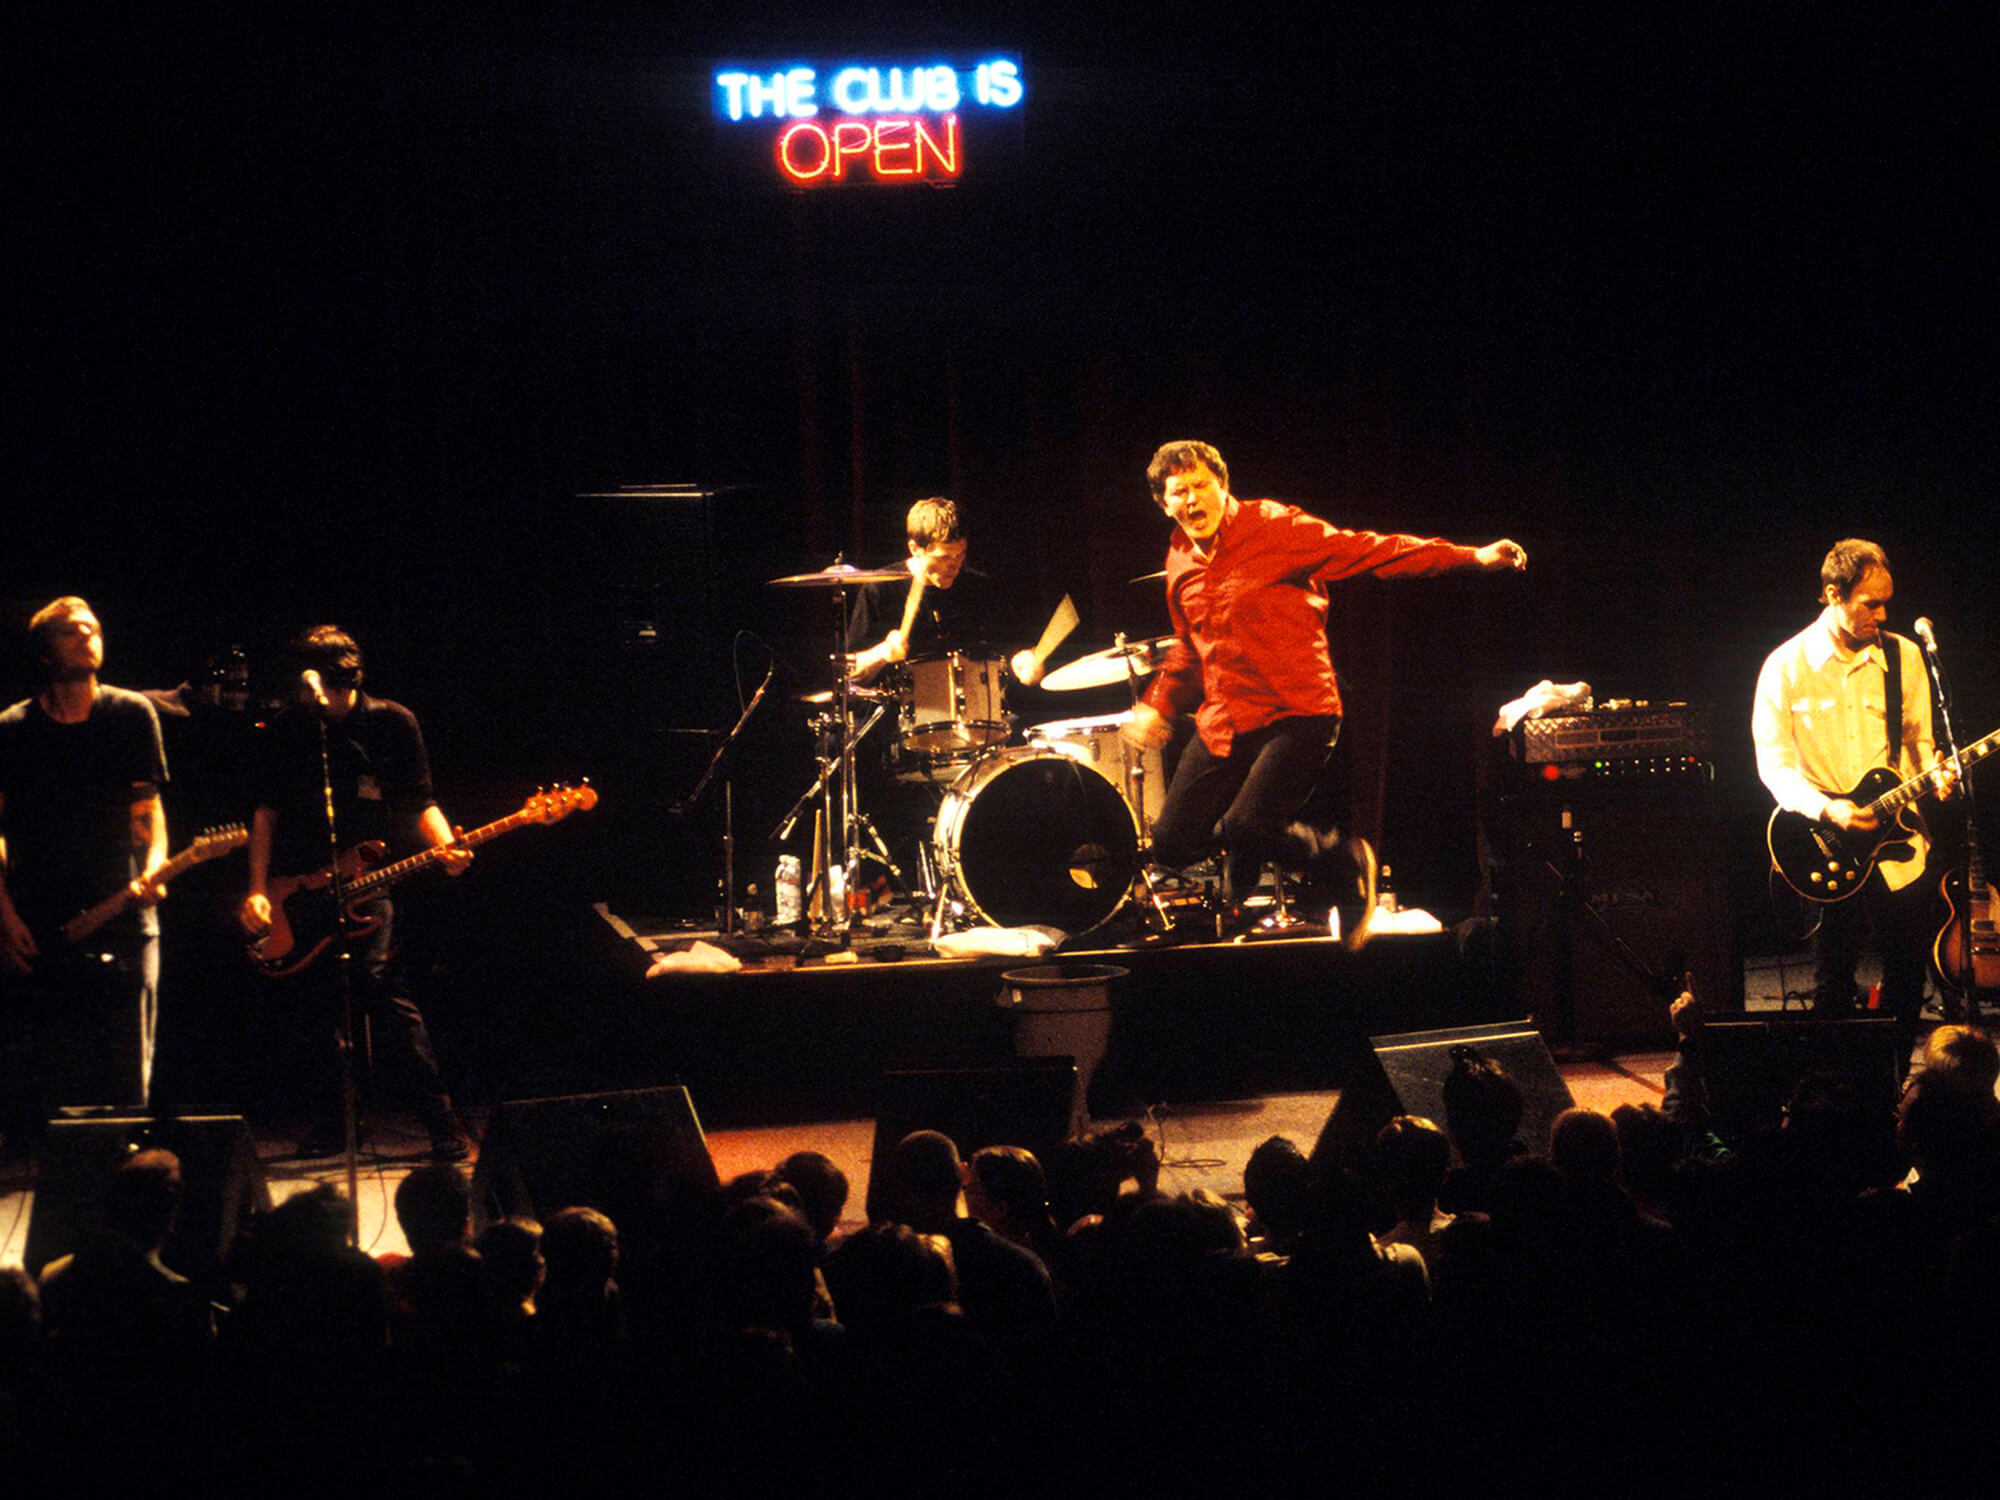 Guided By Voices performing live onstage, photo by Anthony Pidgeon/Redferns via Getty Images